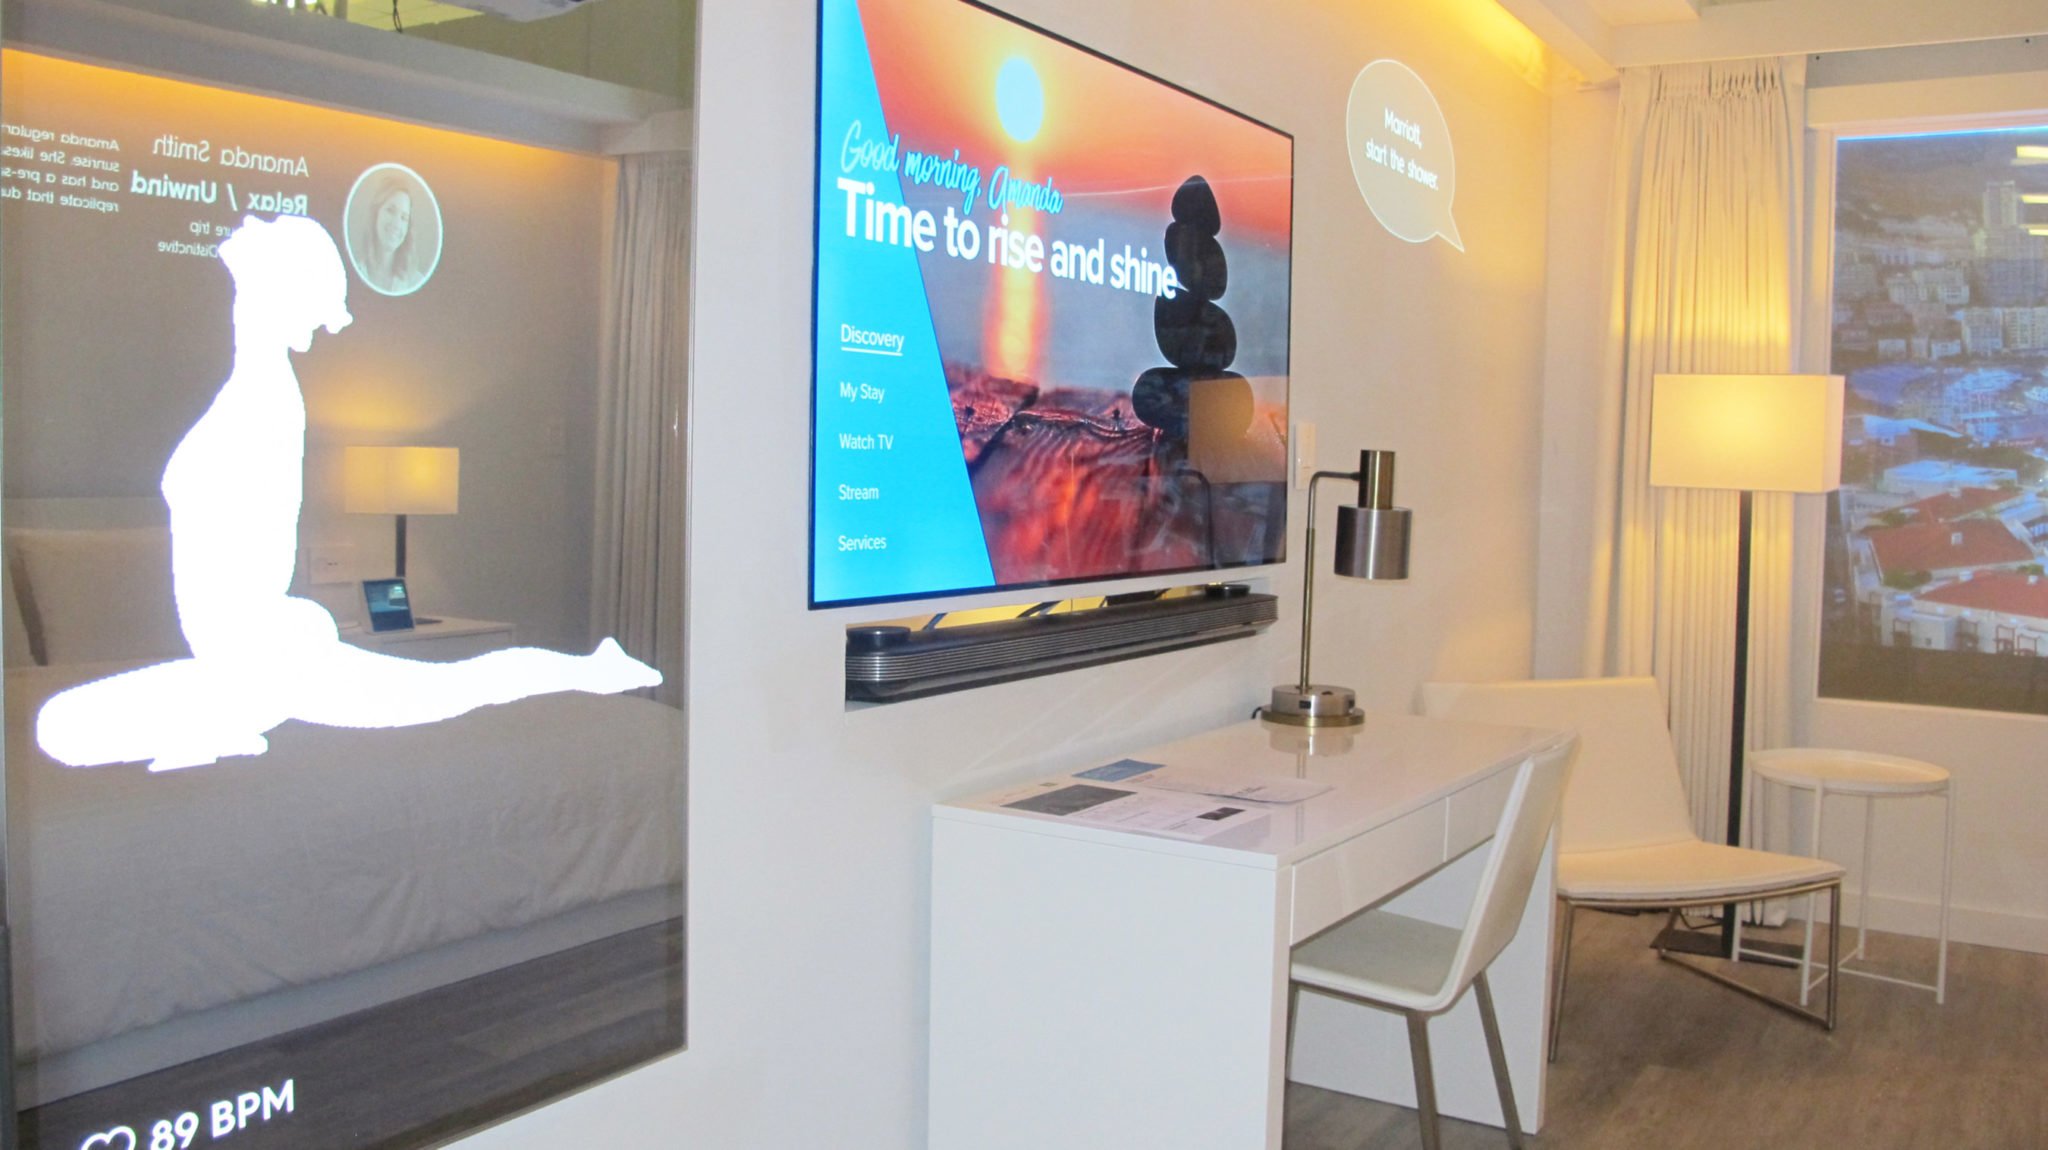 Marriott International Launches Hotel Experience of the Future